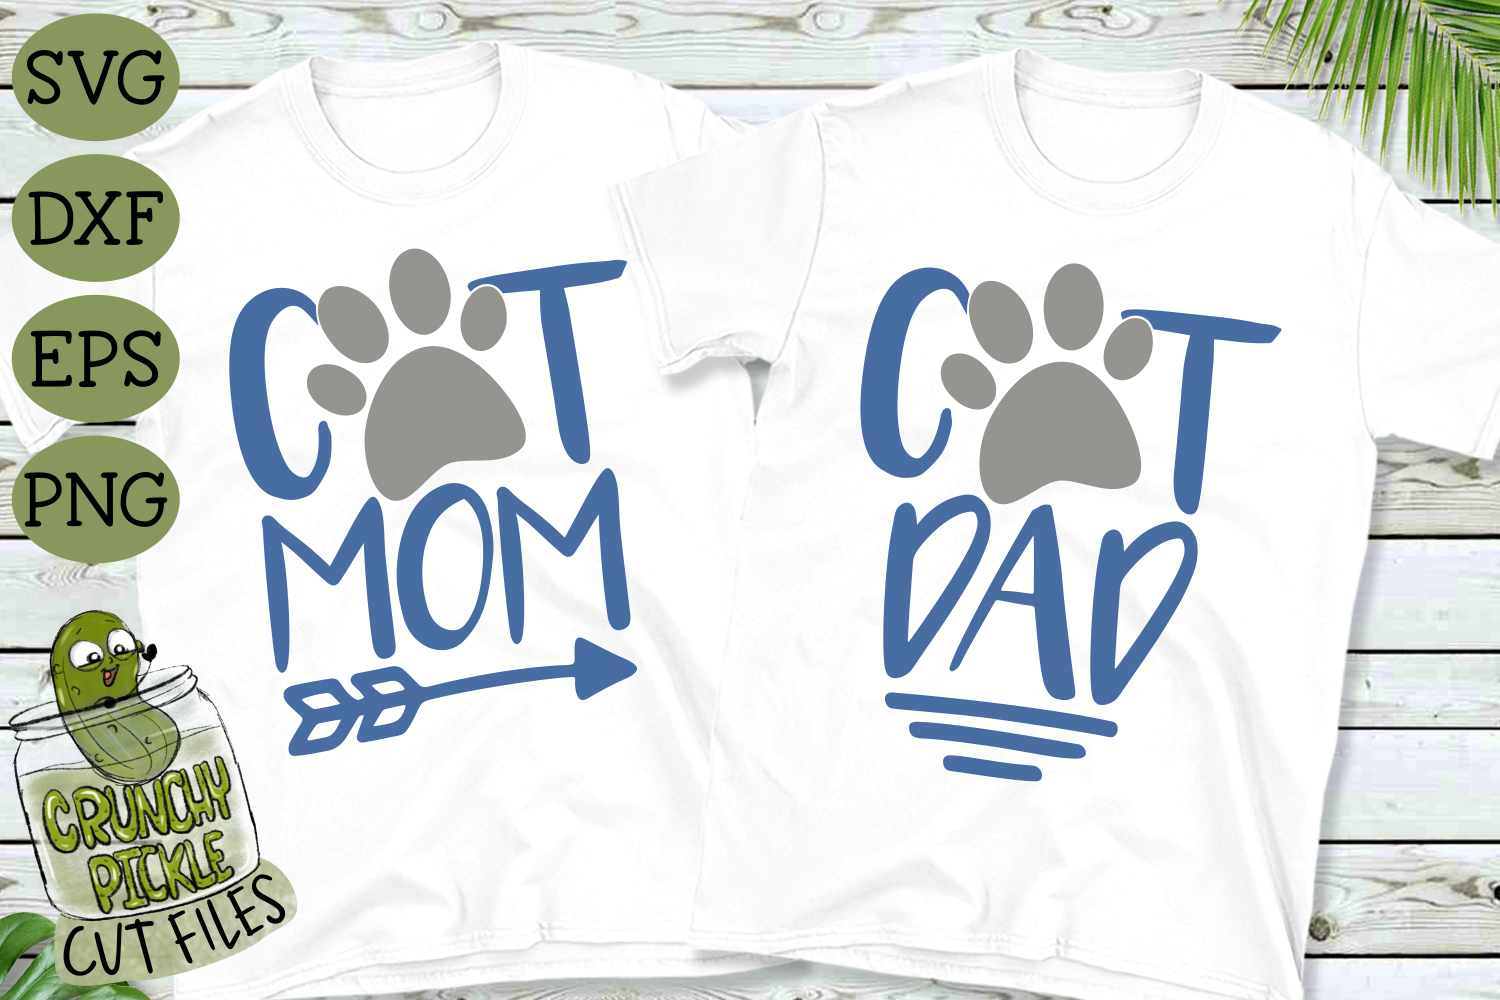 Download Cat Mom and Cat Dad Matching SVG Files By Crunchy Pickle | TheHungryJPEG.com